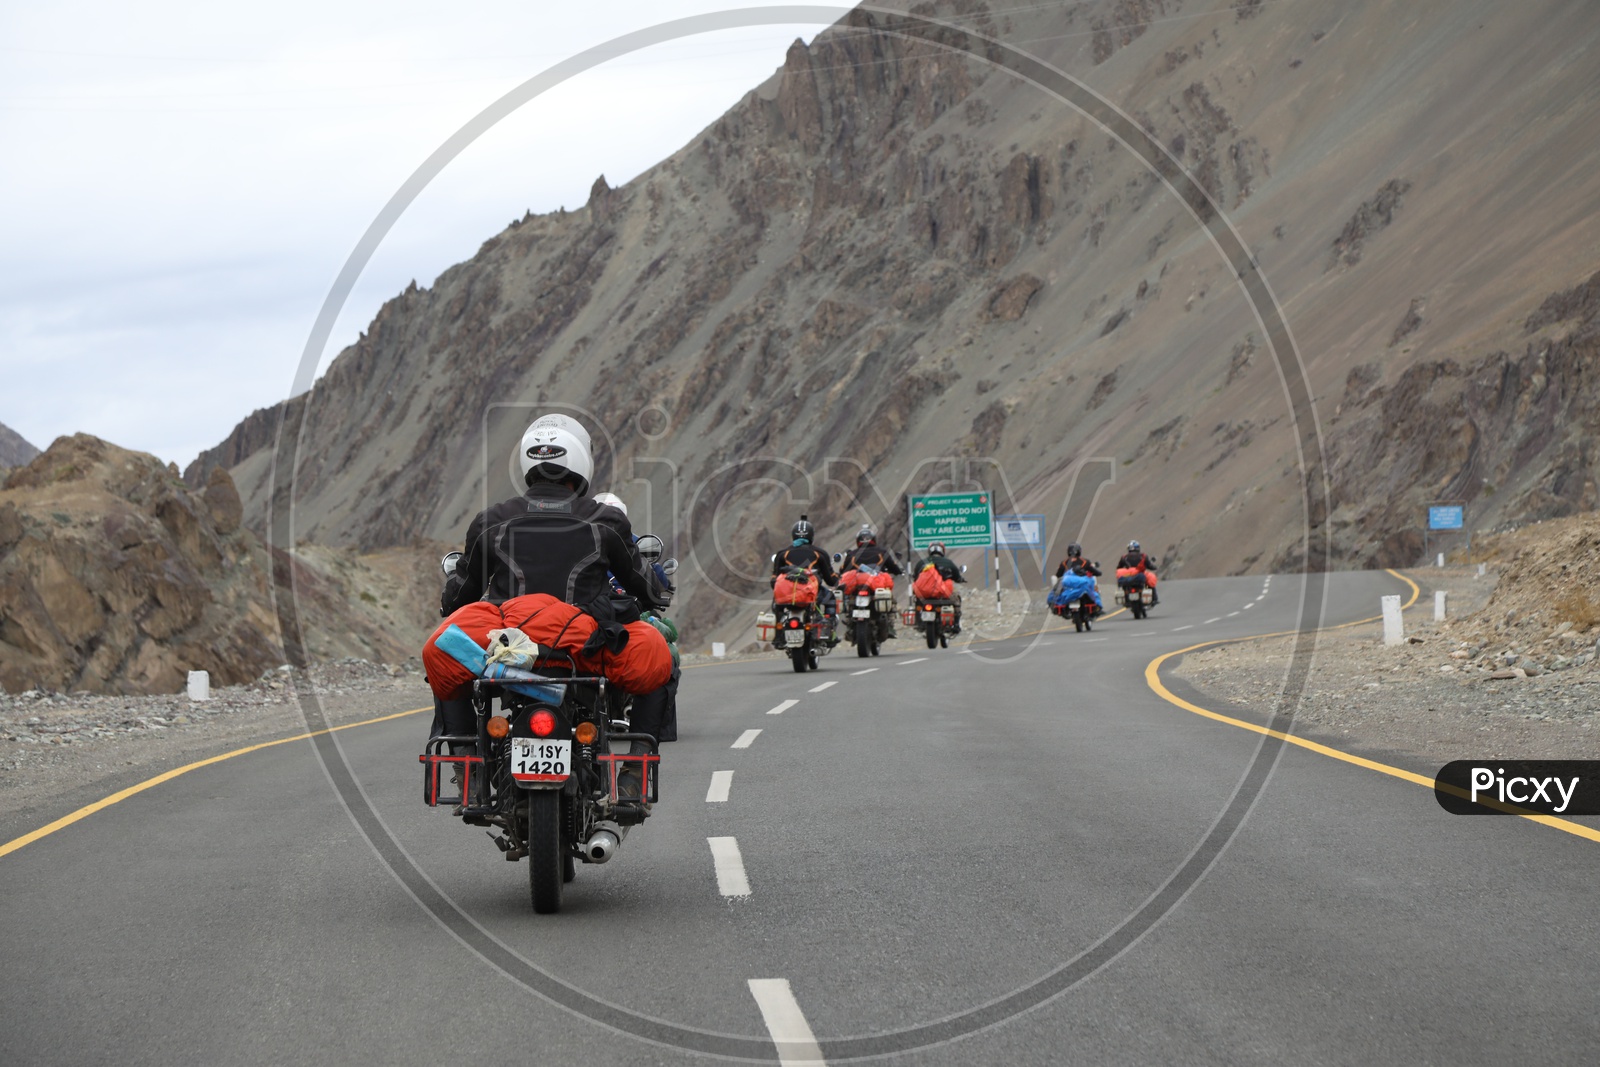 Roadways of Leh with Beautiful Mountains / Travelers riding bikes on Leh roads